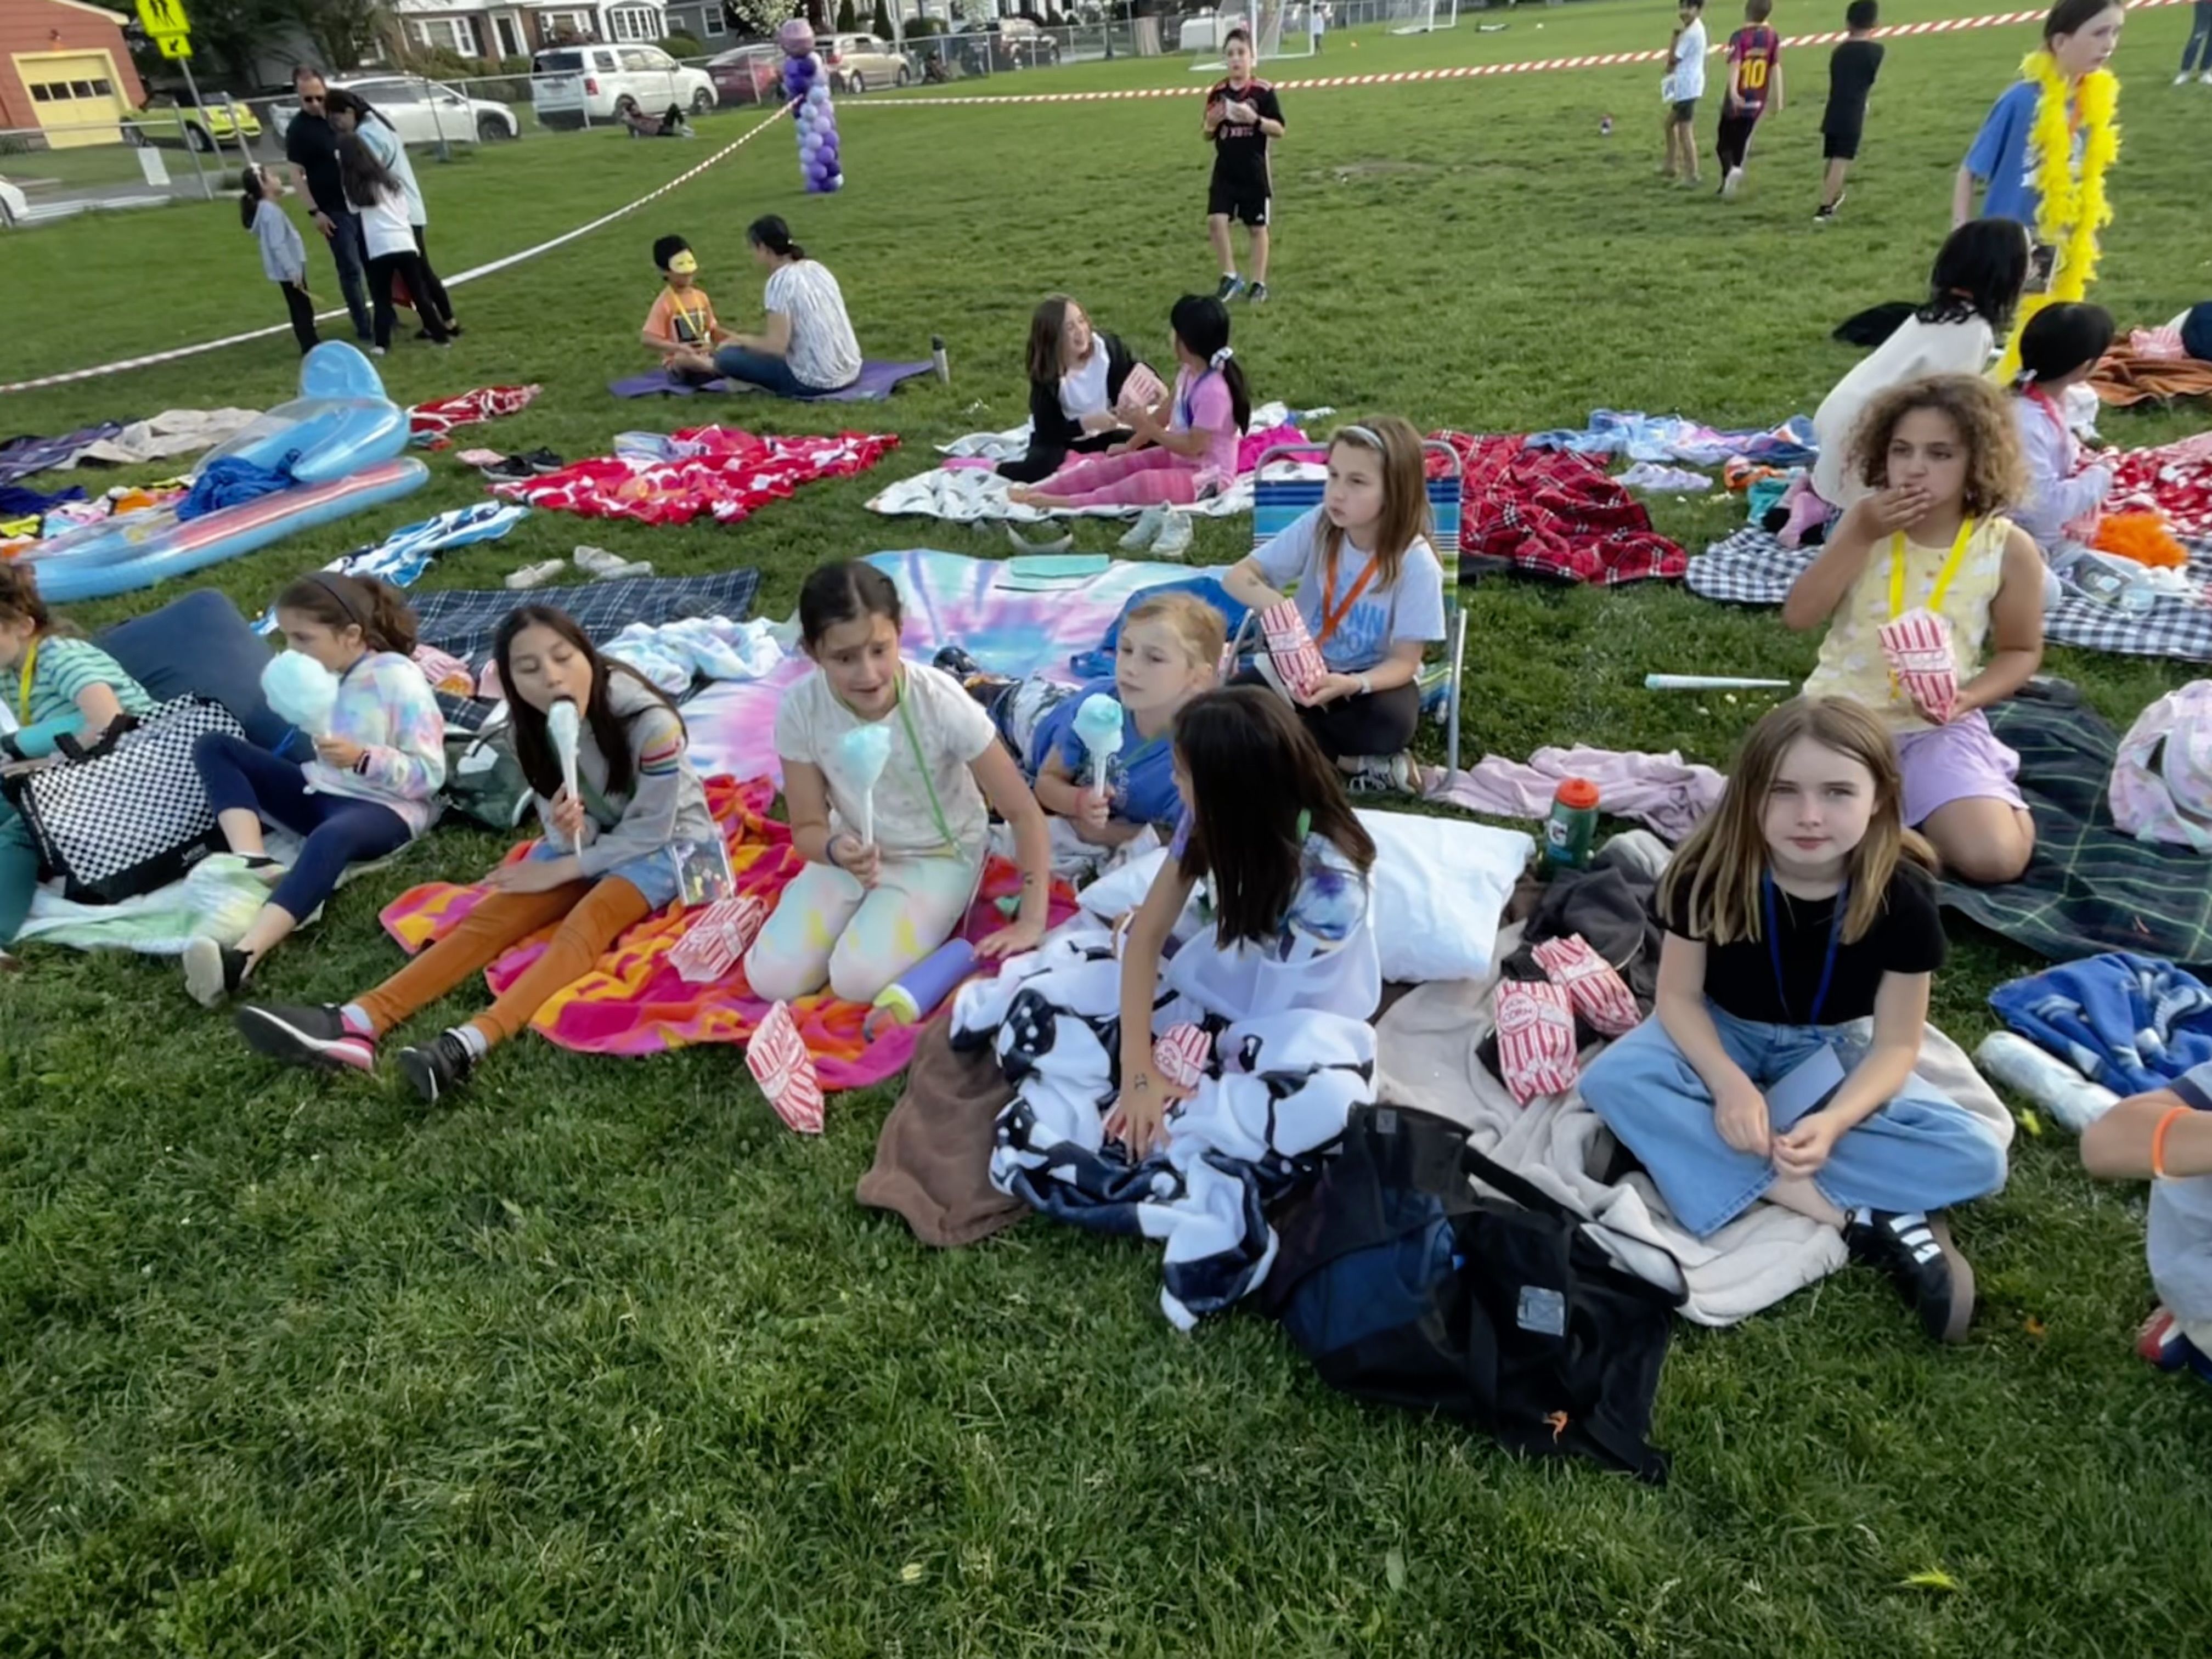 picnicking kids before movie night outside